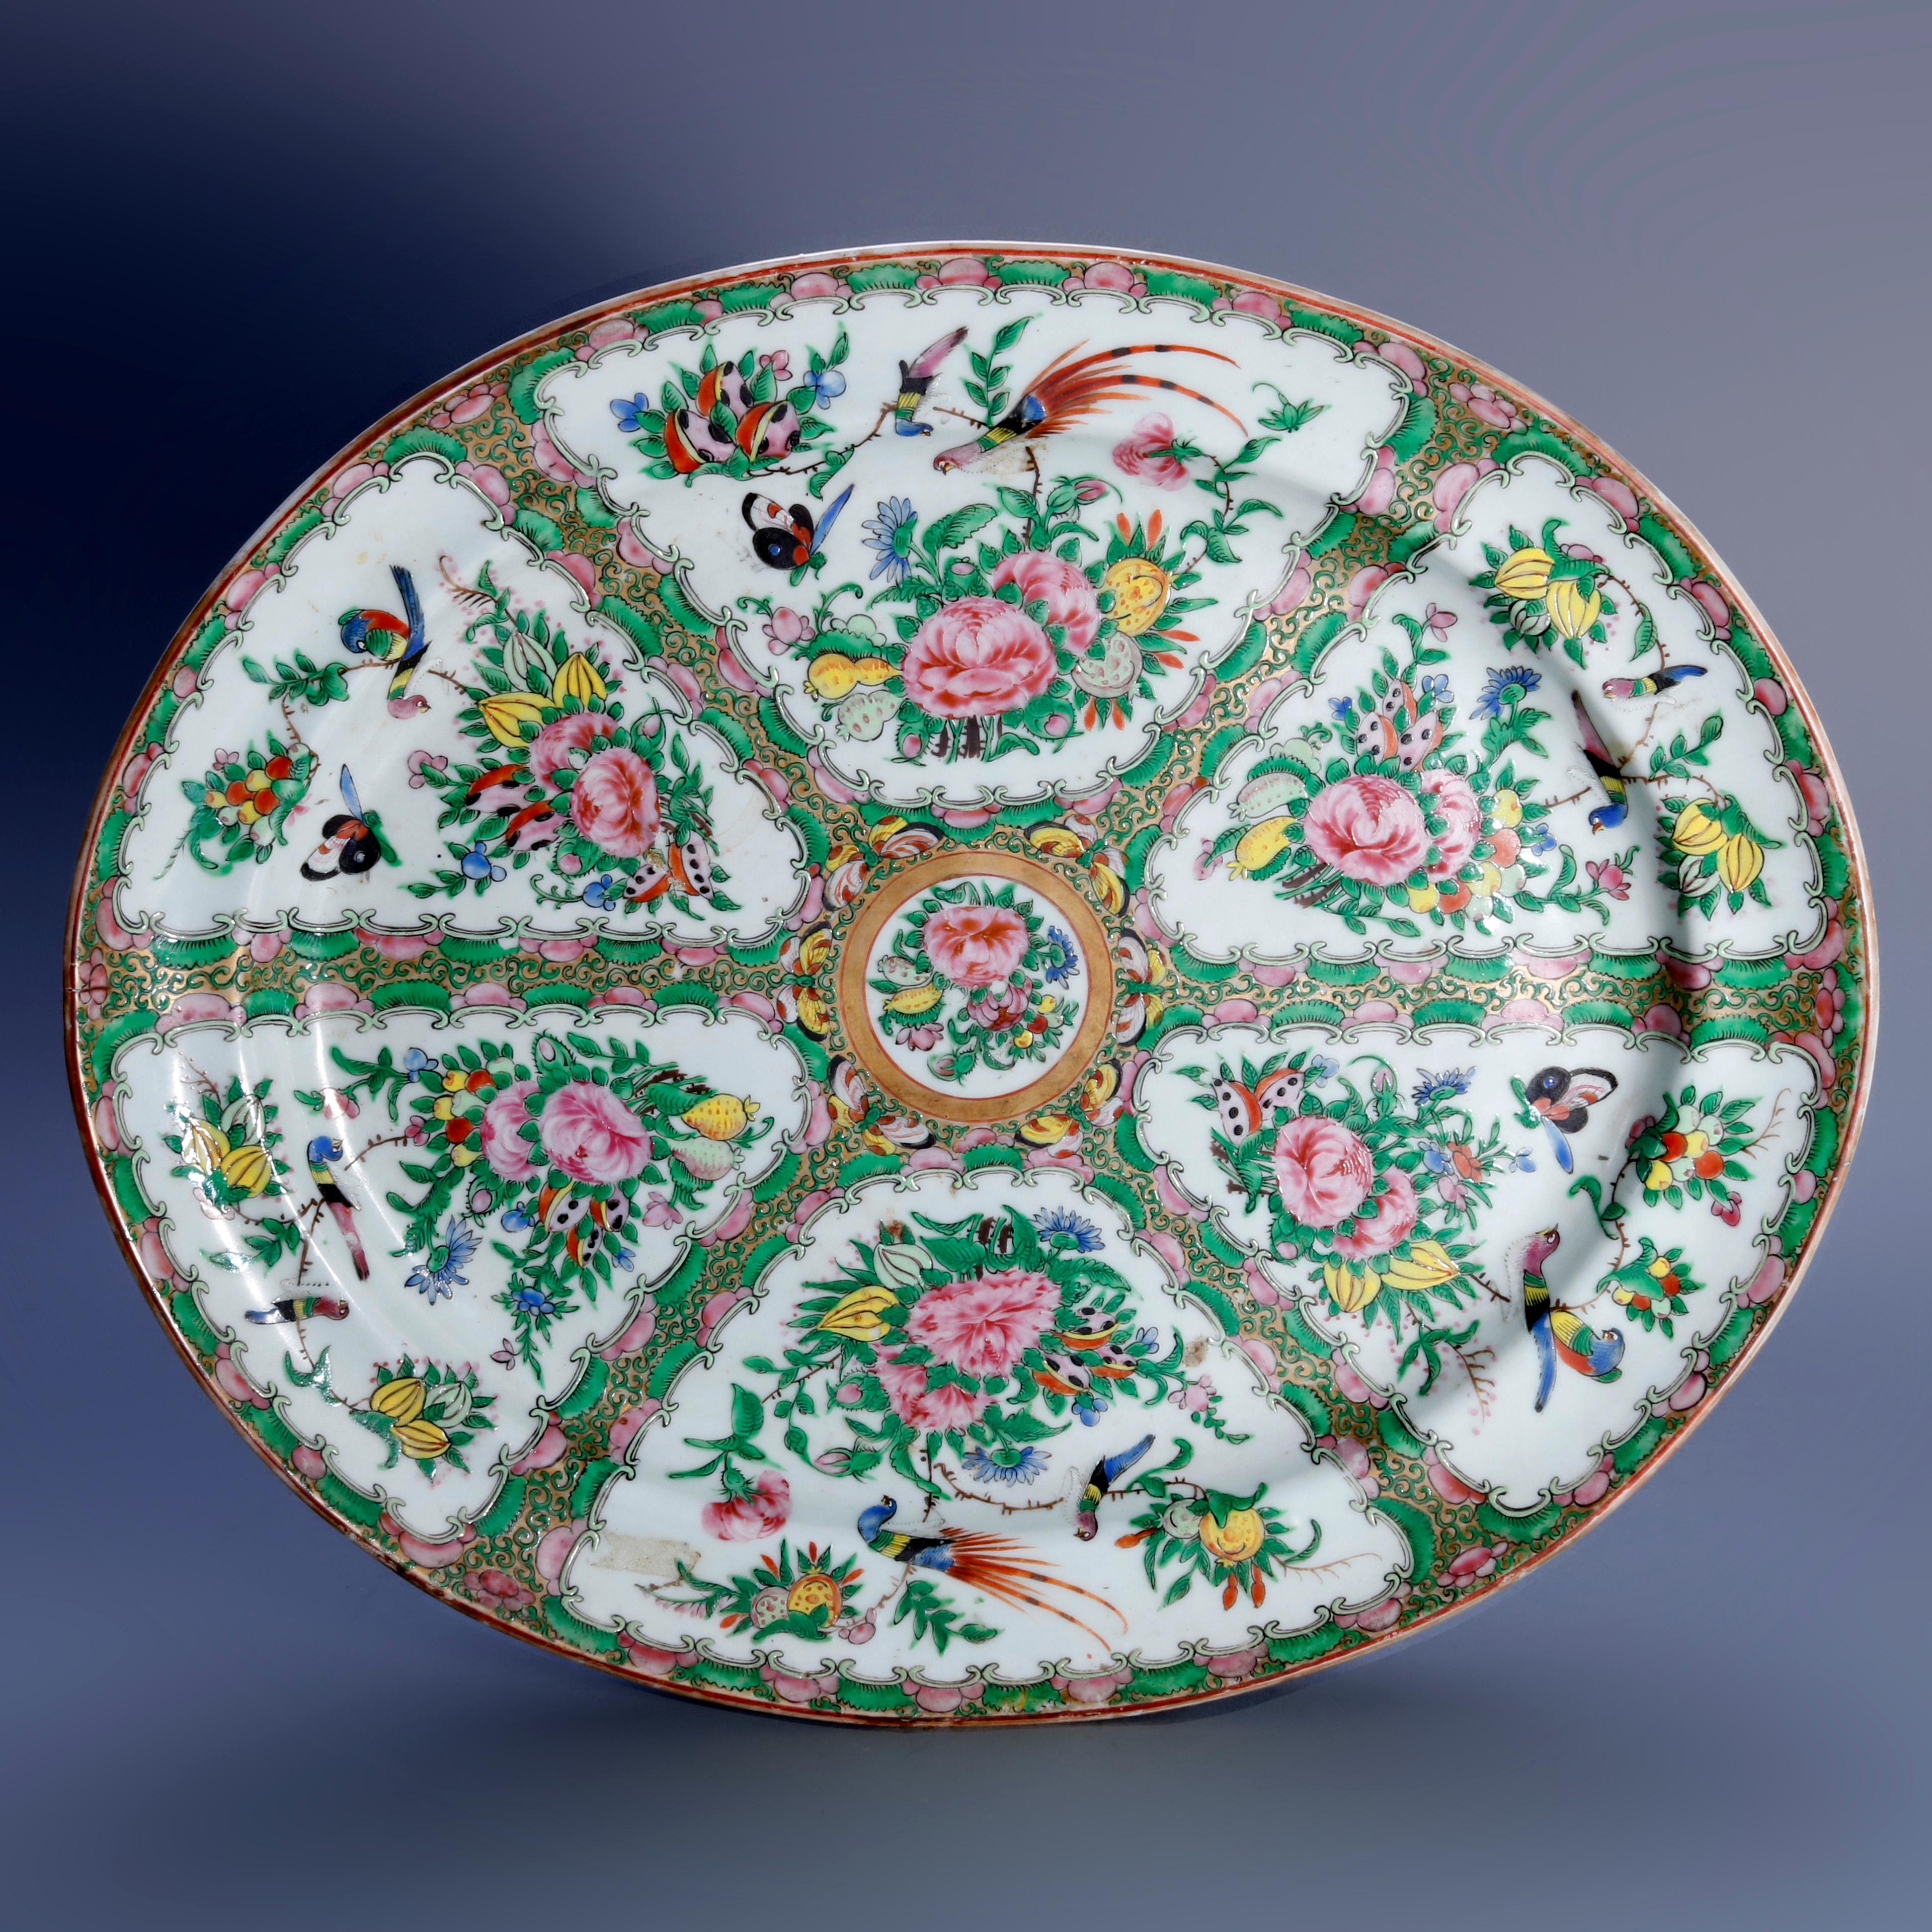 19th Century Chinese Rose Medallion Enamel and Gilt Decorated Porcelain Platter, circa 1890